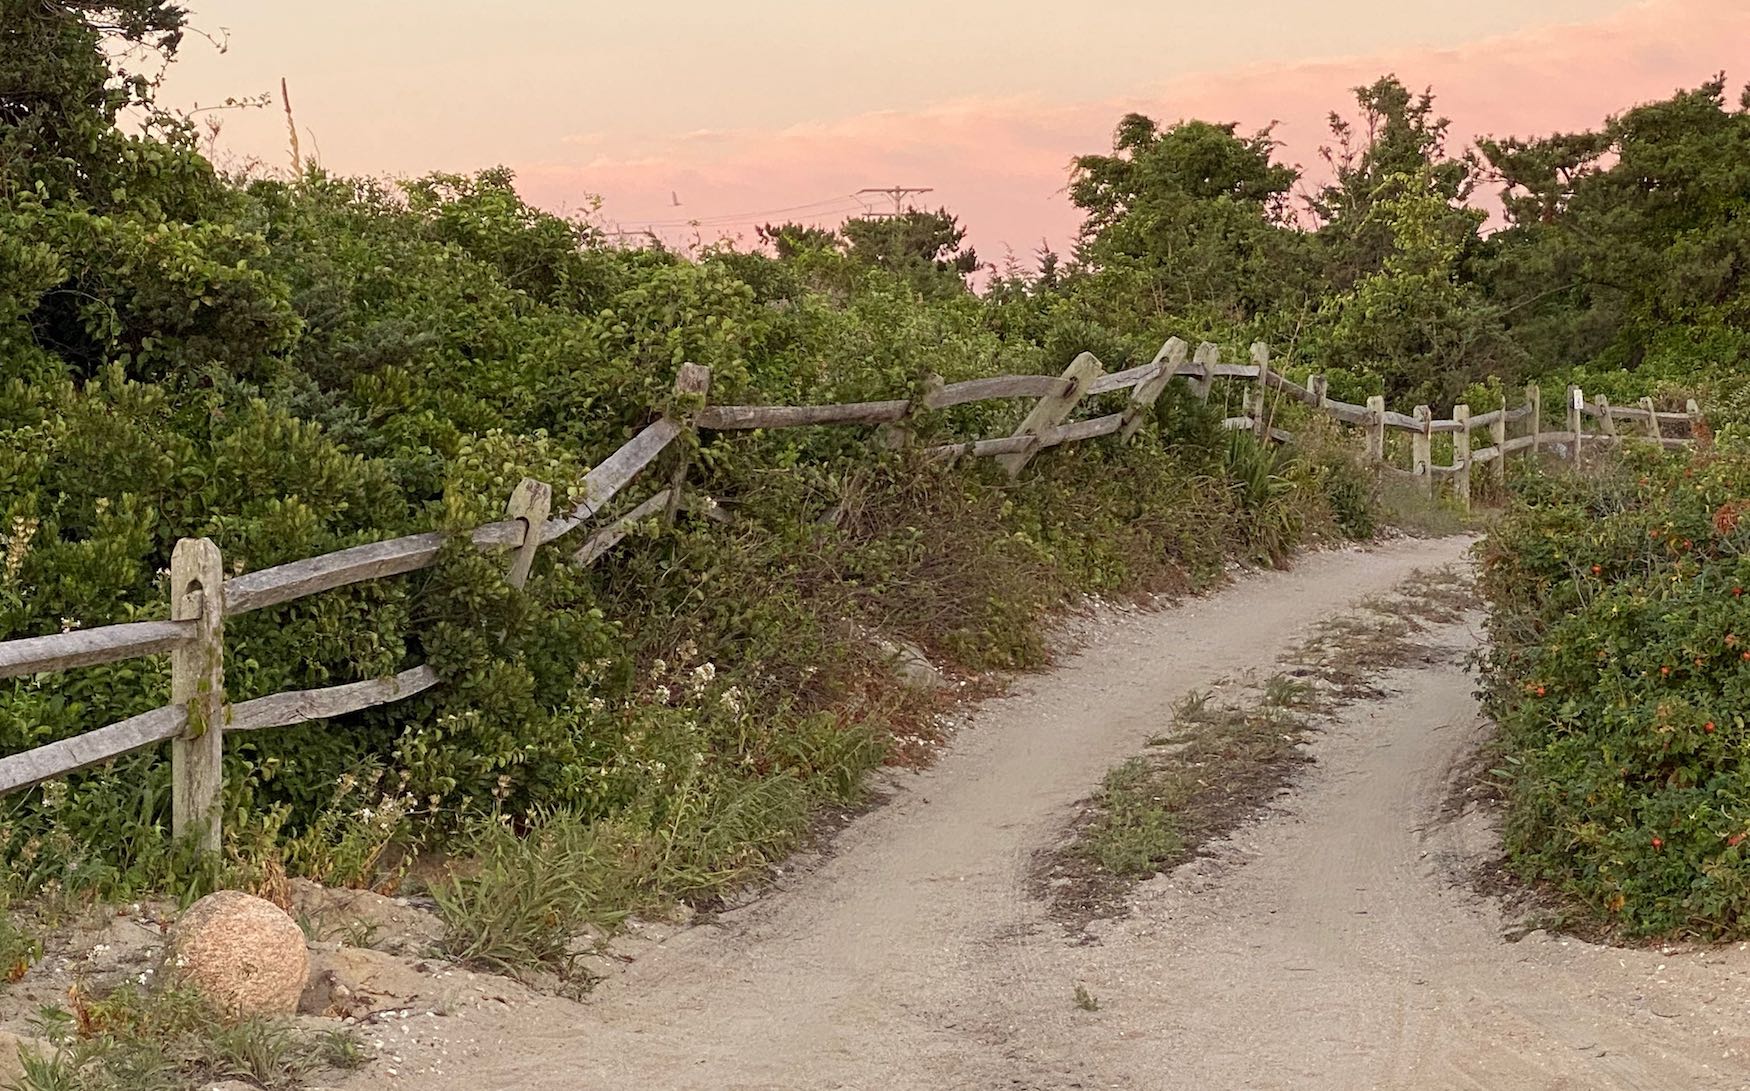 It's the weekend! Number 261, A Sandy Road and Split Rail Fence